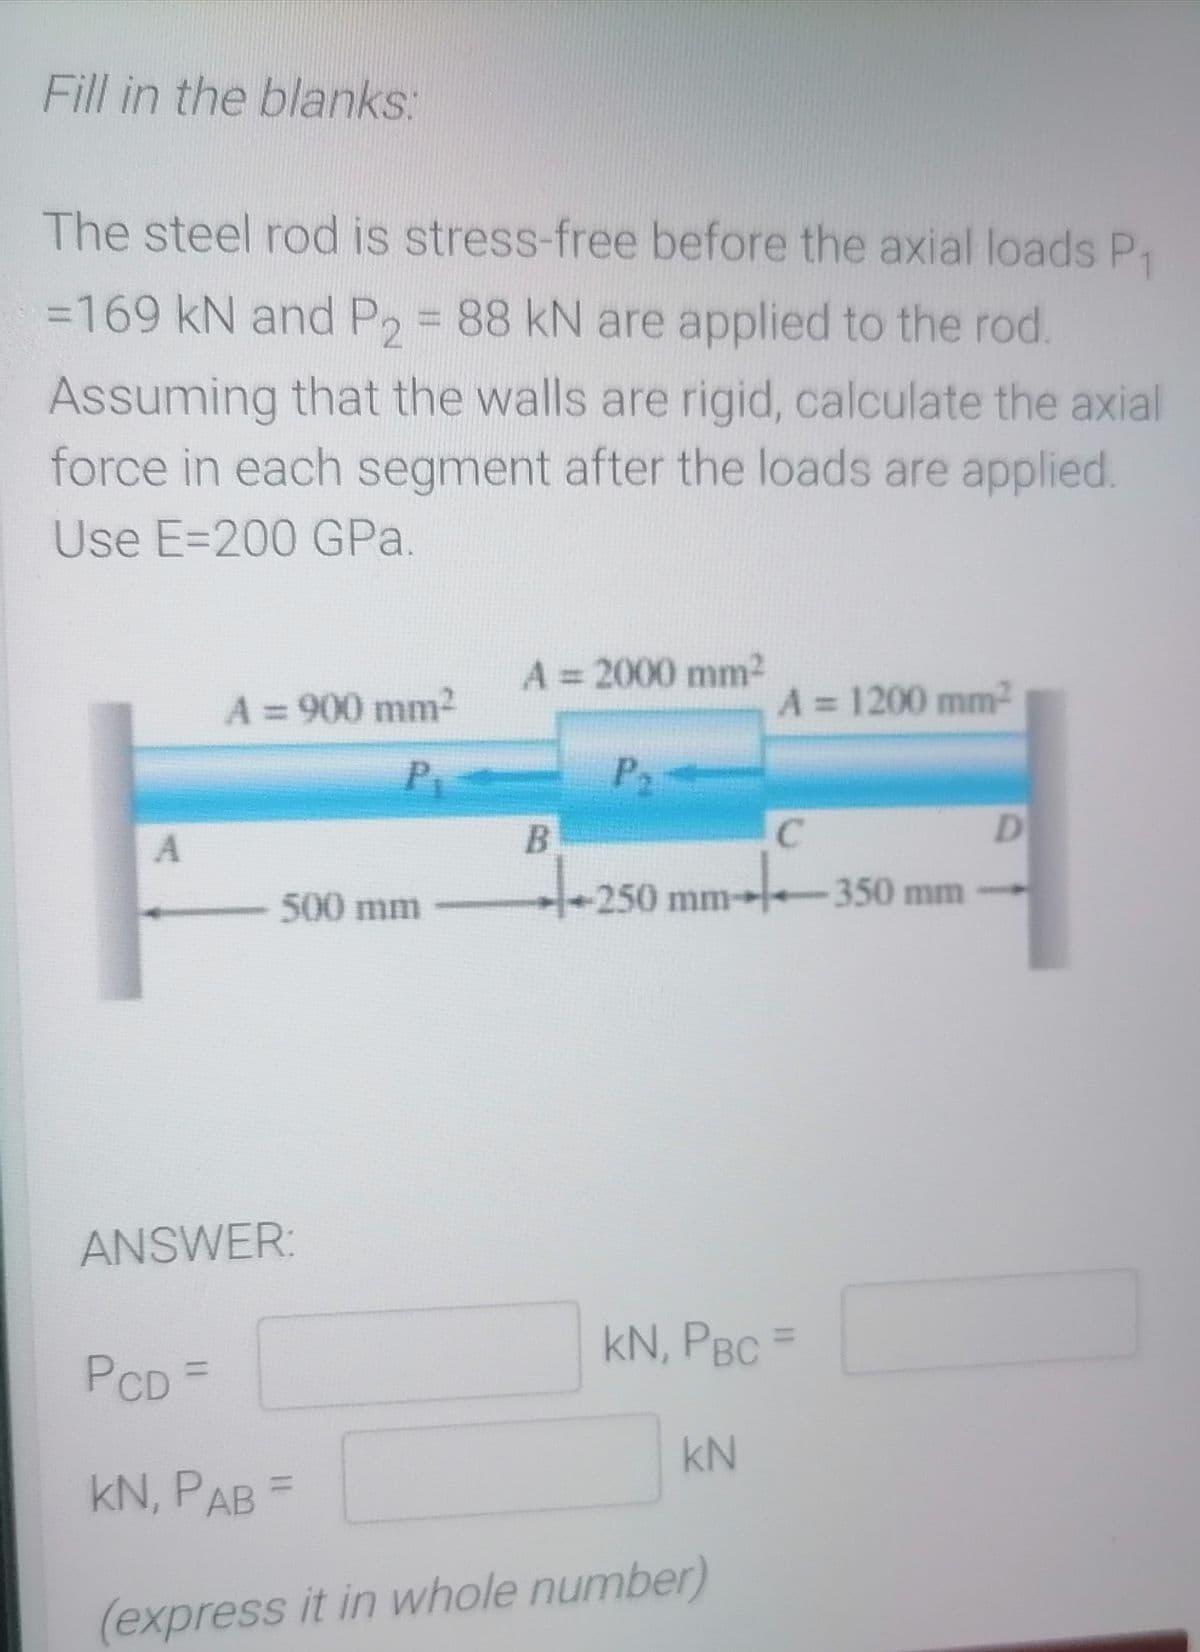 Fill in the blanks:
The steel rod is stress-free before the axial loads P1
=169 kN and P2 = 88 kN are applied to the rod.
Assuming that the walls are rigid, calculate the axial
force in each segment after the loads are applied.
Use E=200 GPa.
A = 2000 mm2
A = 900 mm2
A = 1200 mm2
P2
D
t+250 mm-
350 mm-
500 mm
ANSWER:
kN, PBC =
PCD =
kN
kN, PAB =
(express it in whole number)
